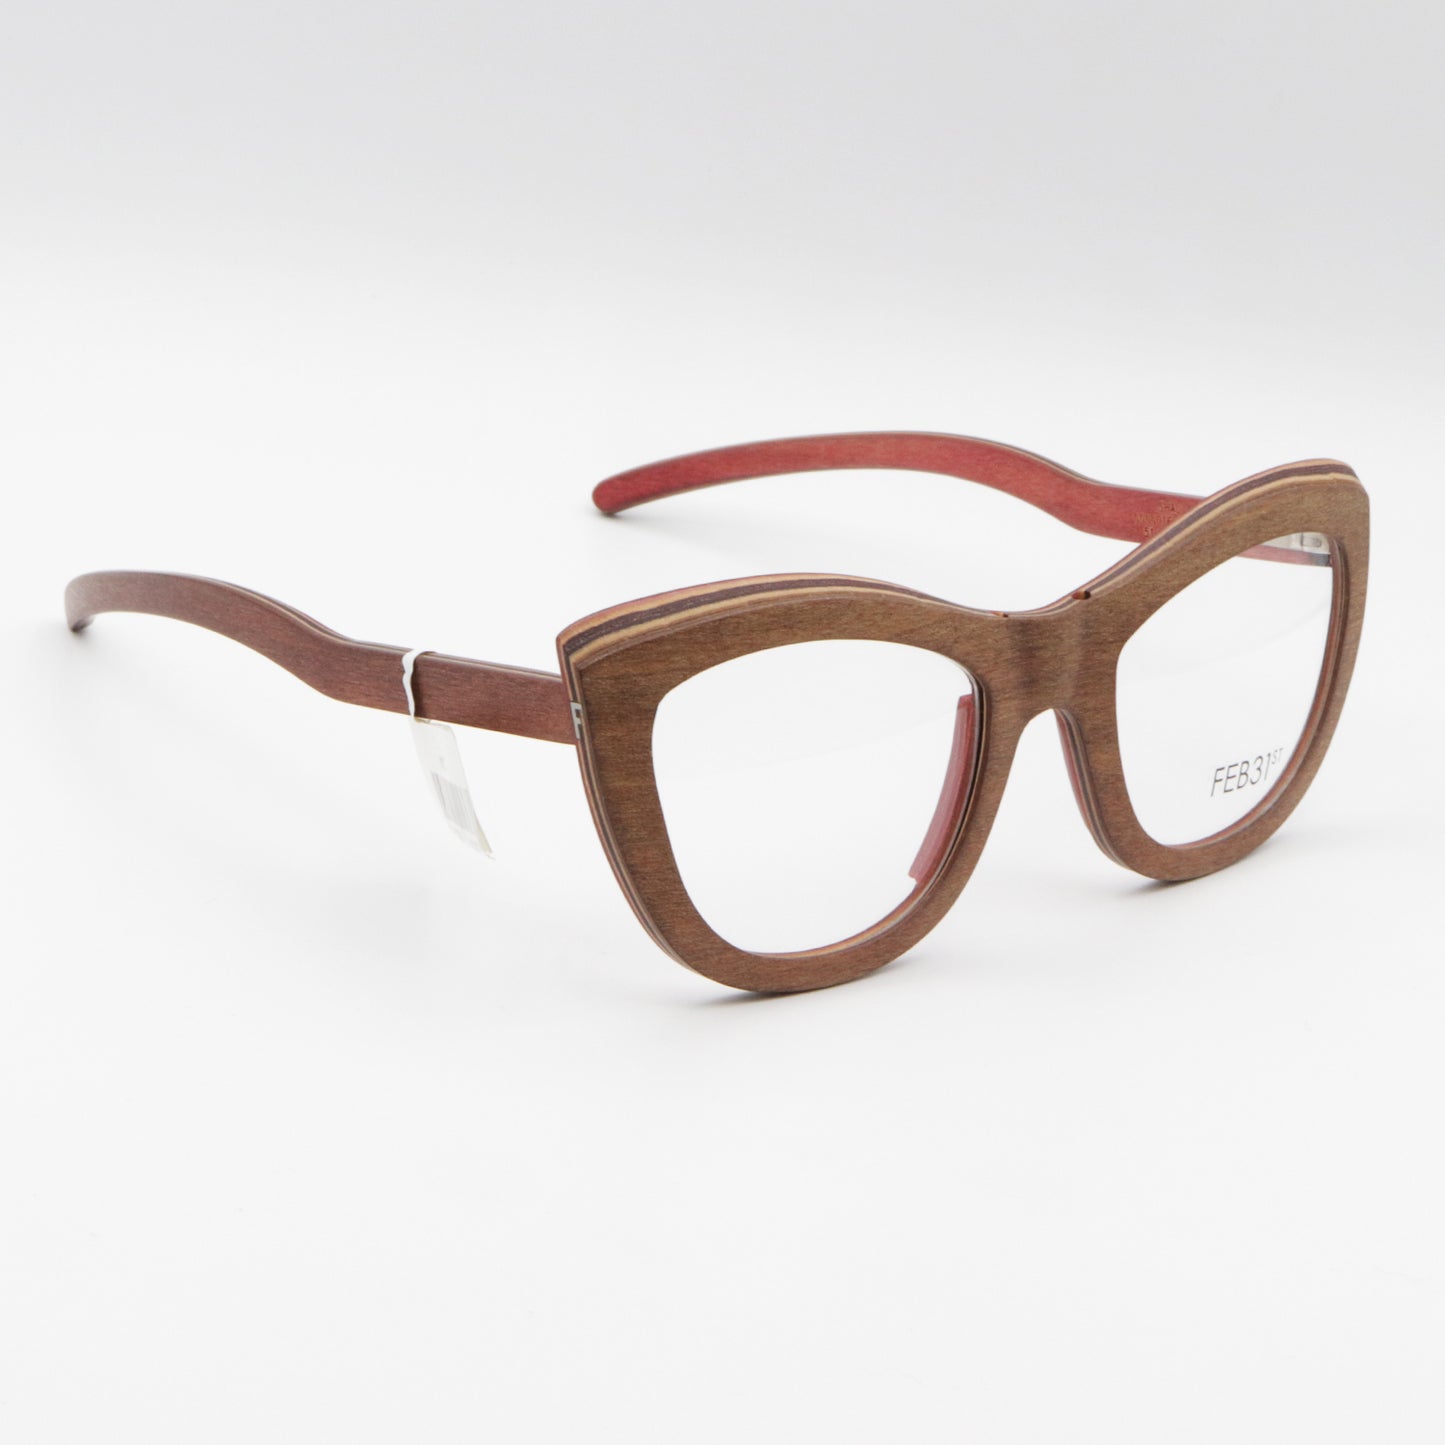 Shaula by FEB31st wooden glasses Brown